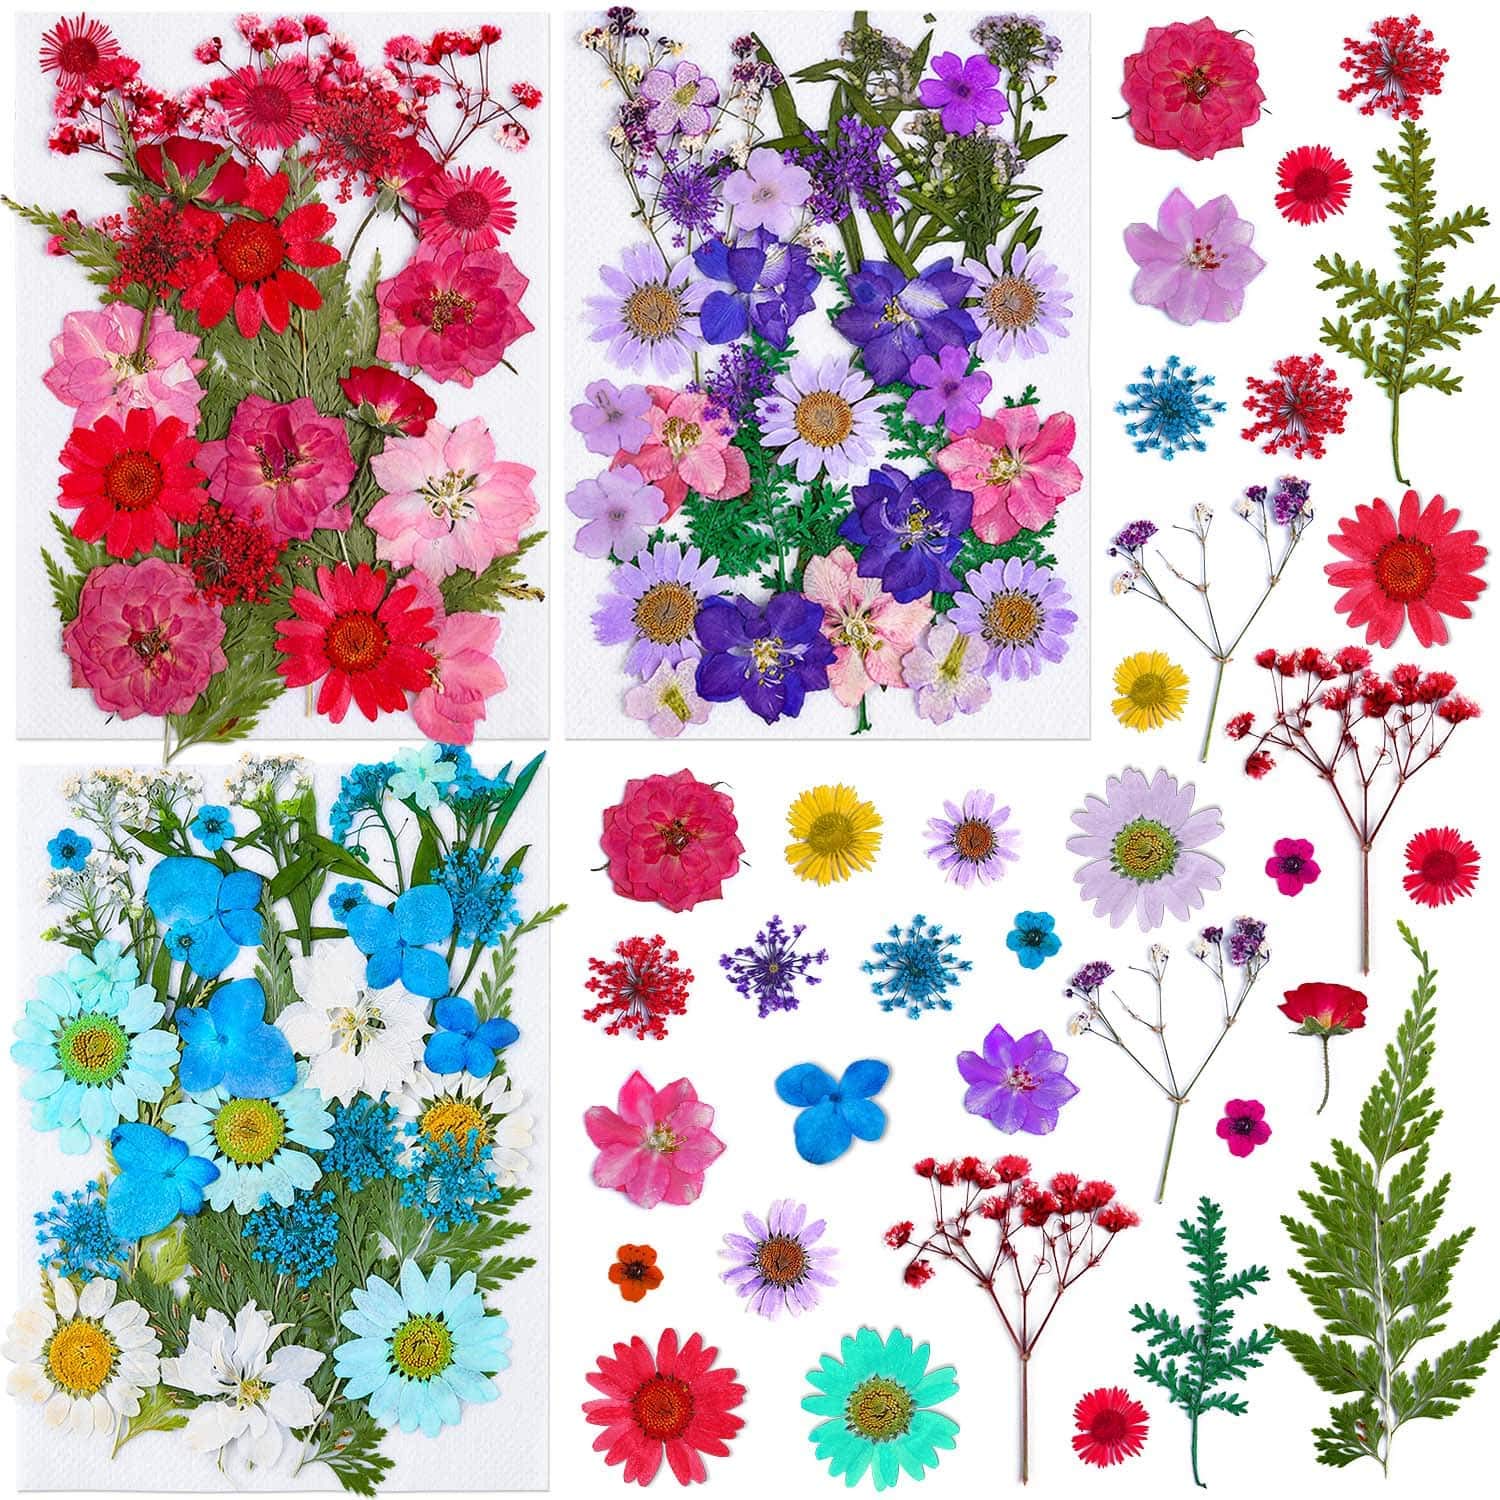  100 Pieces Dried Pressed Flowers for Resin Real Nature Flowers  with Leaves Dried Flowers for Crafts DIY Art Candle Soap Making Nail Decors  (Colorful Flower)